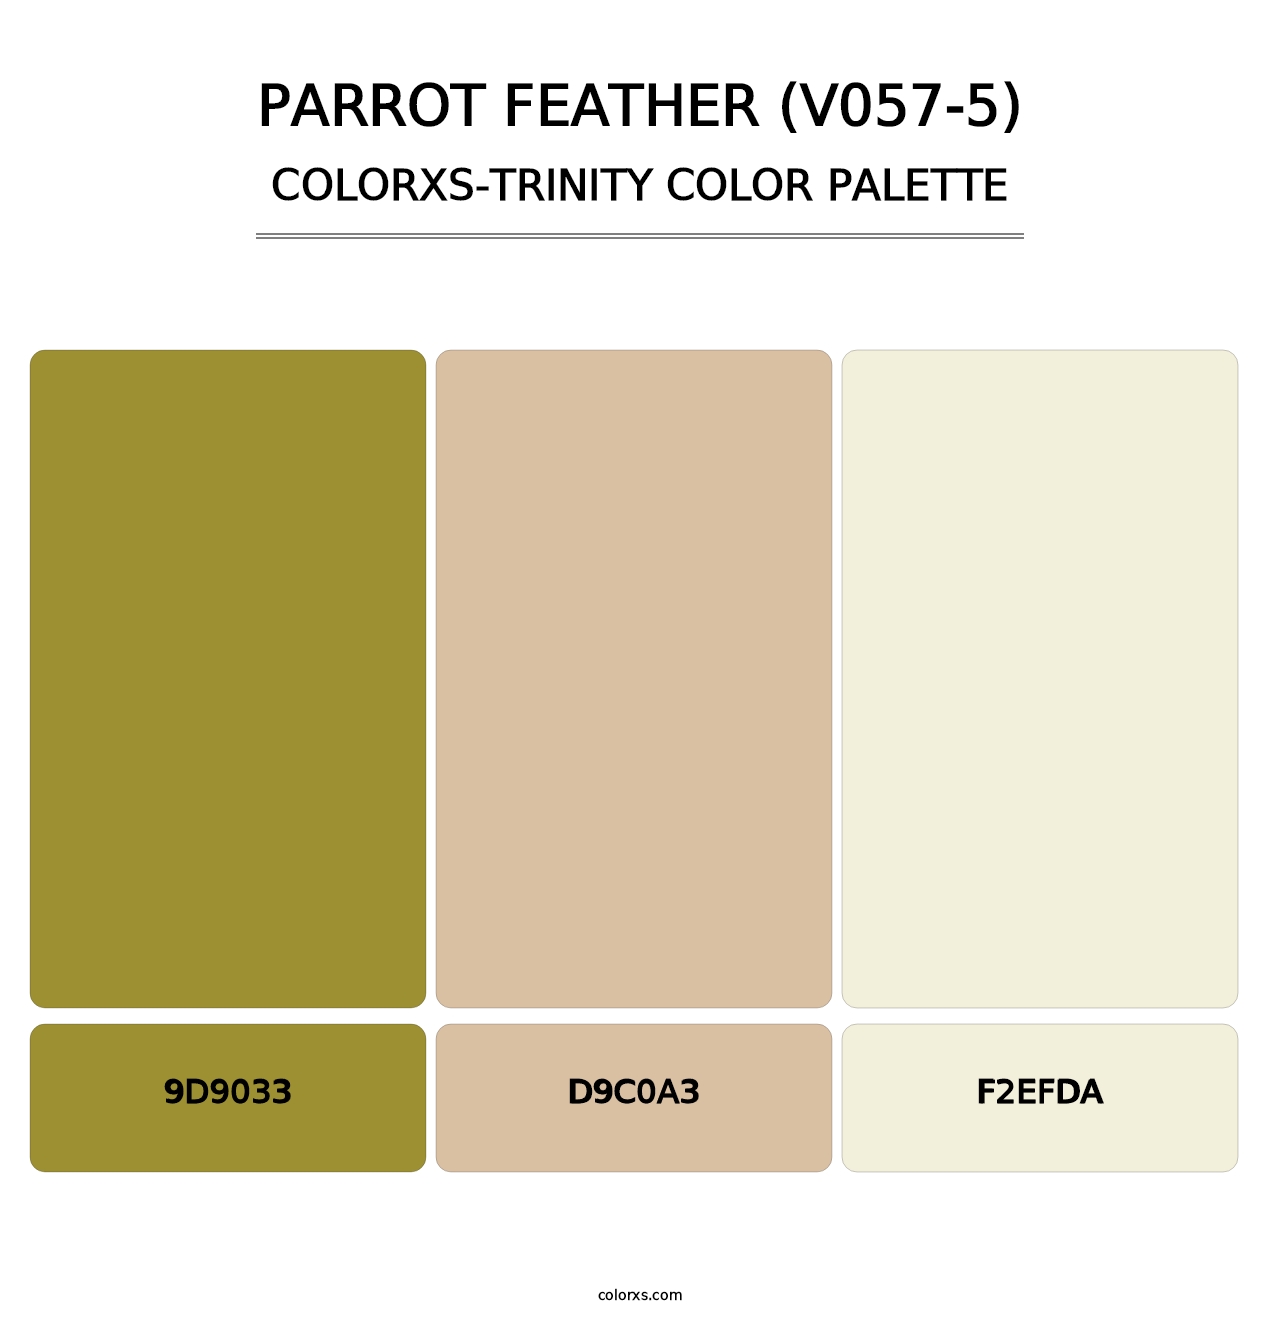 Parrot Feather (V057-5) - Colorxs Trinity Palette